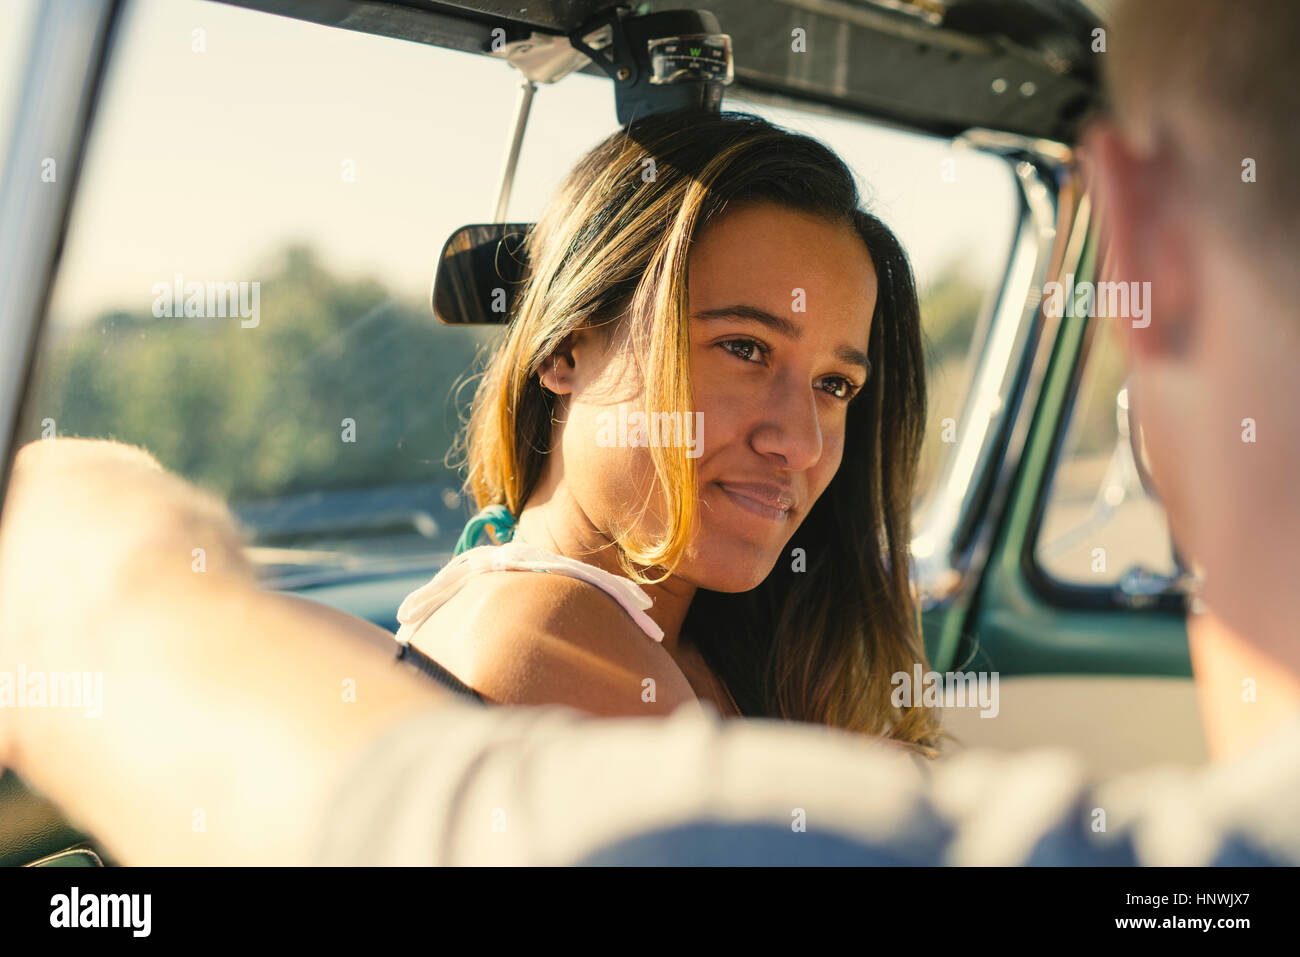 Over shoulder view of road trip couple in parked truck Stock Photo